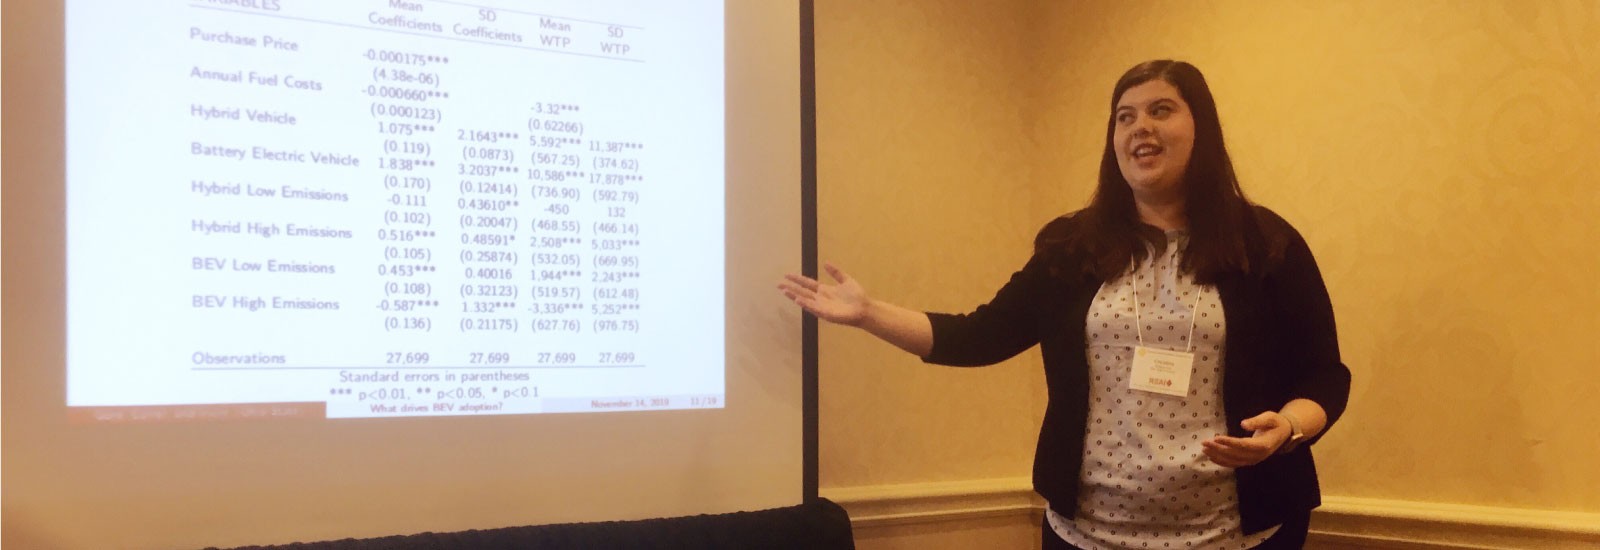 Christina Gore presenting her research at a conference in Pennsylvania.